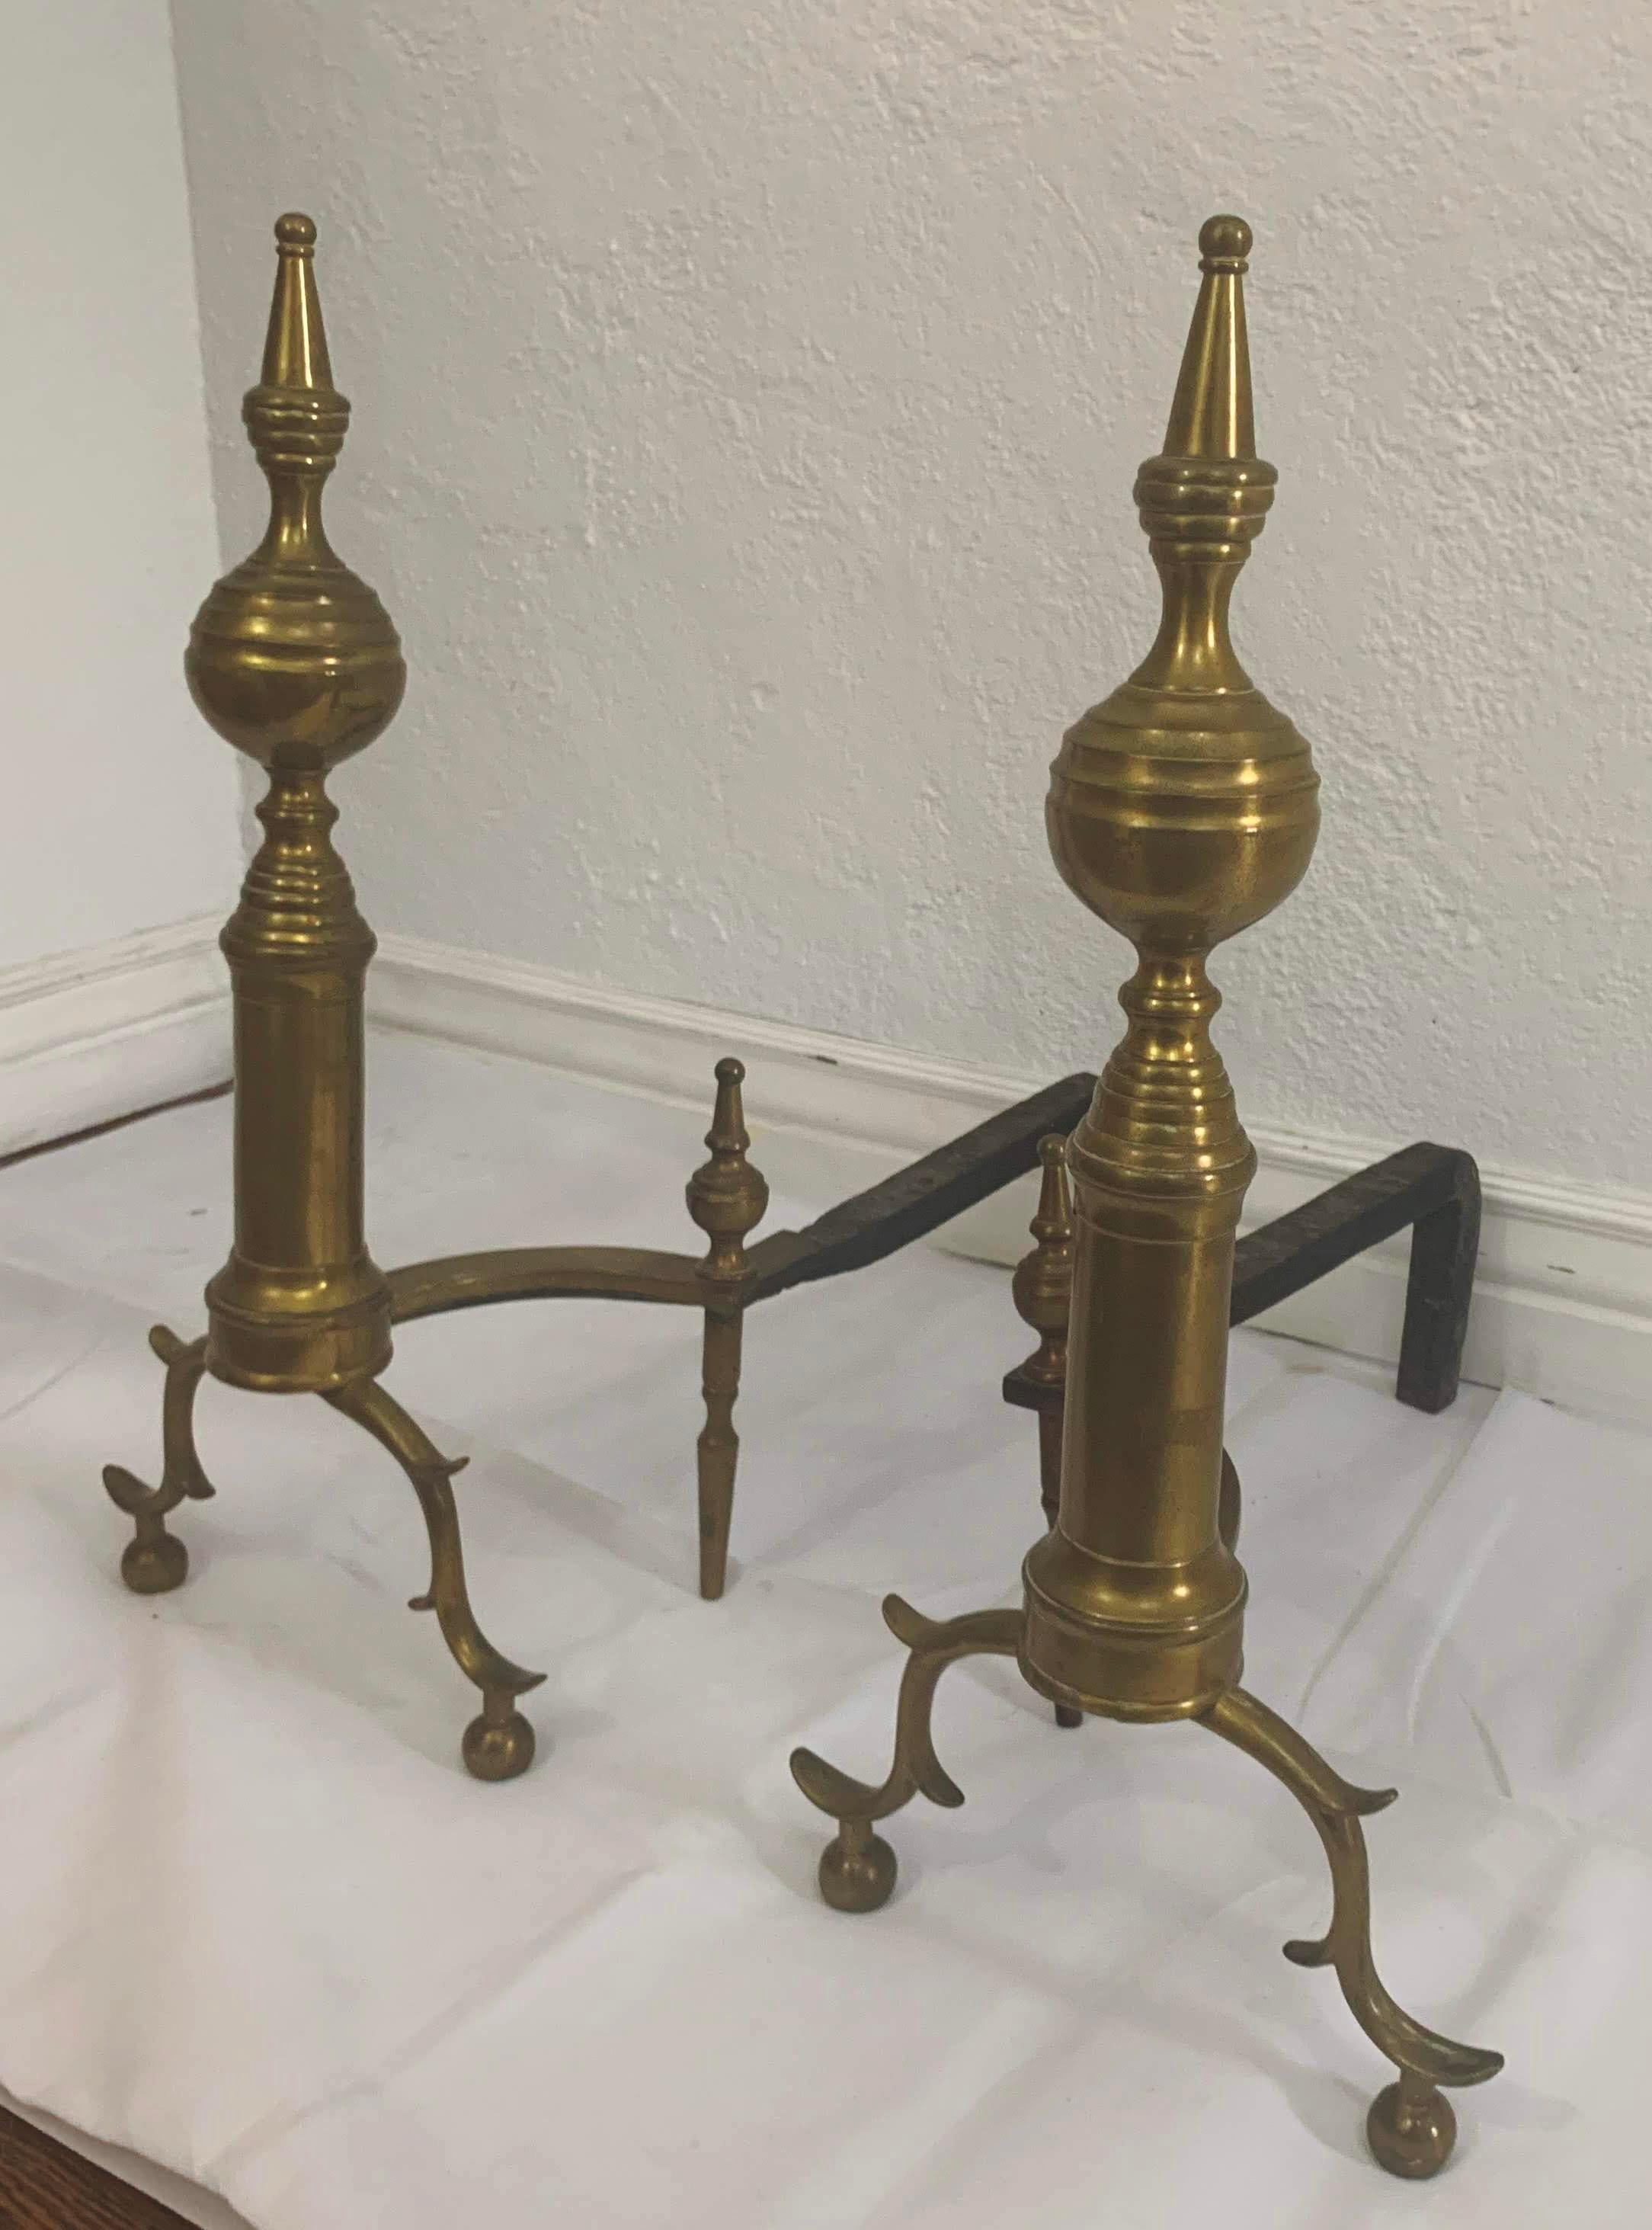 Late 18th century American New York steeple top andirons with S-scrolled legs and spurs ending in ball feet. The body is brass with hand-wrought iron shaft.

Dimensions for 1 andiron 
22